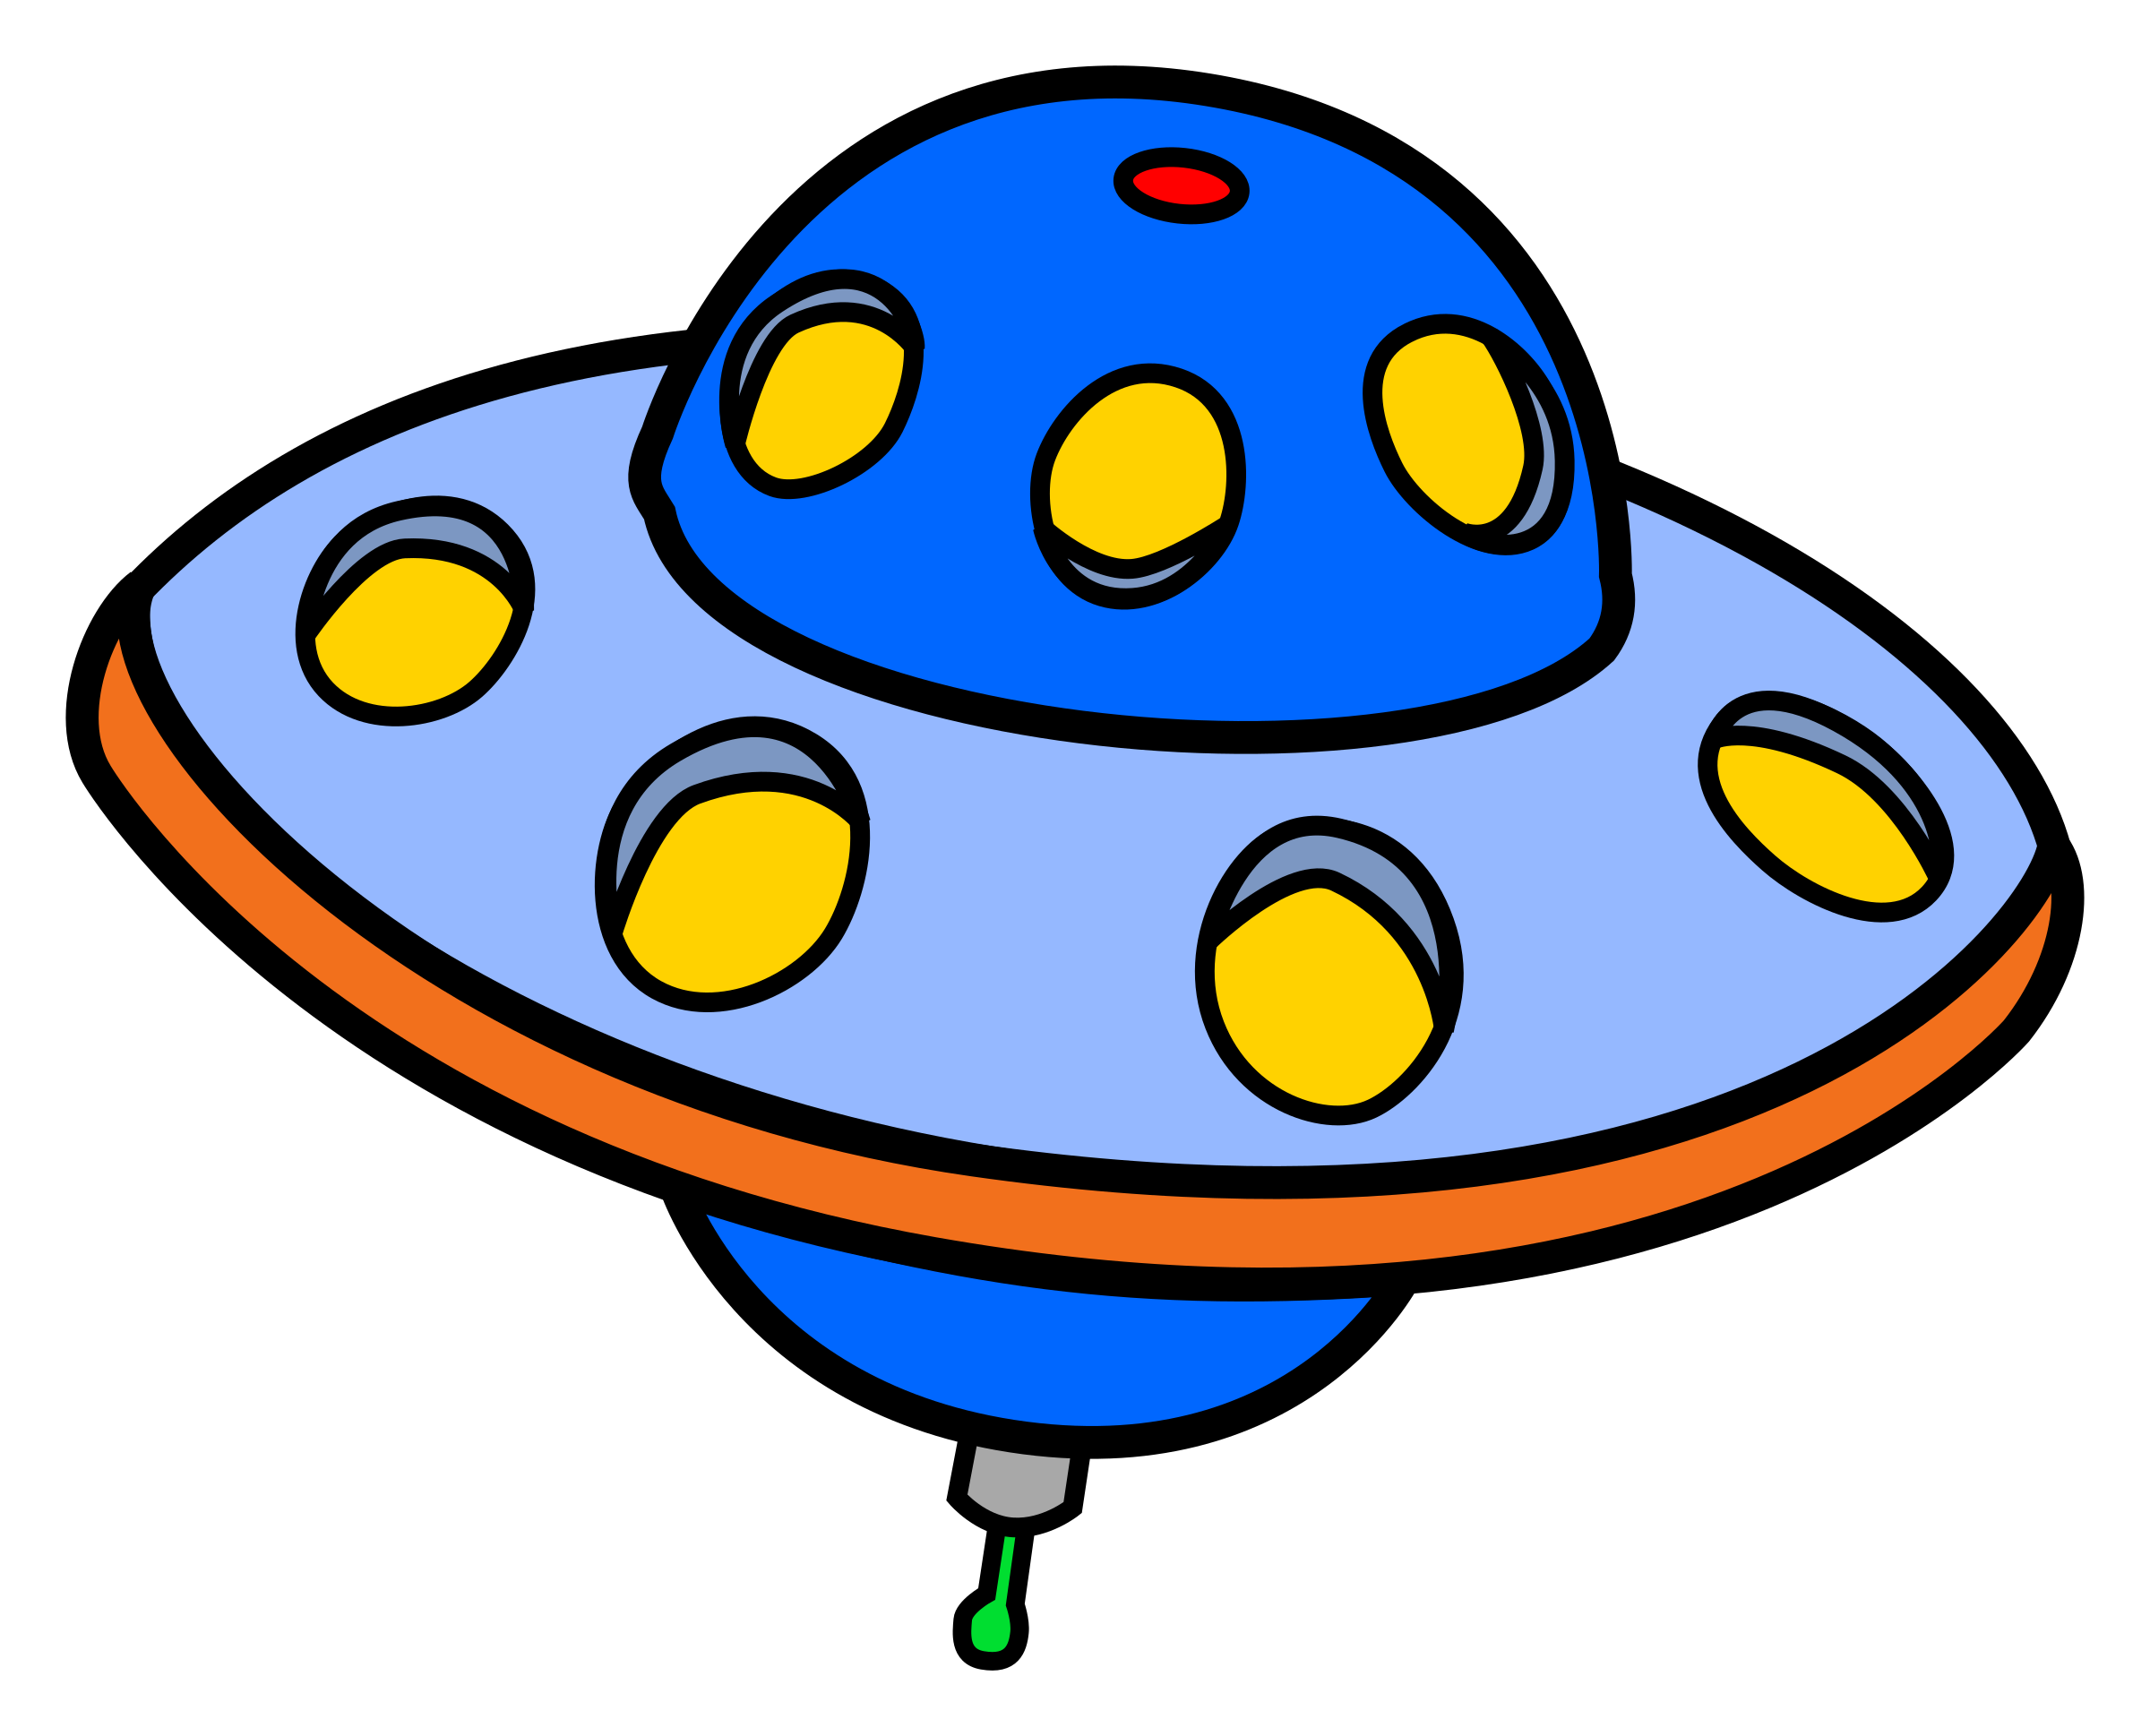 Flying Saucer UFO vector clipart image - Free stock photo 